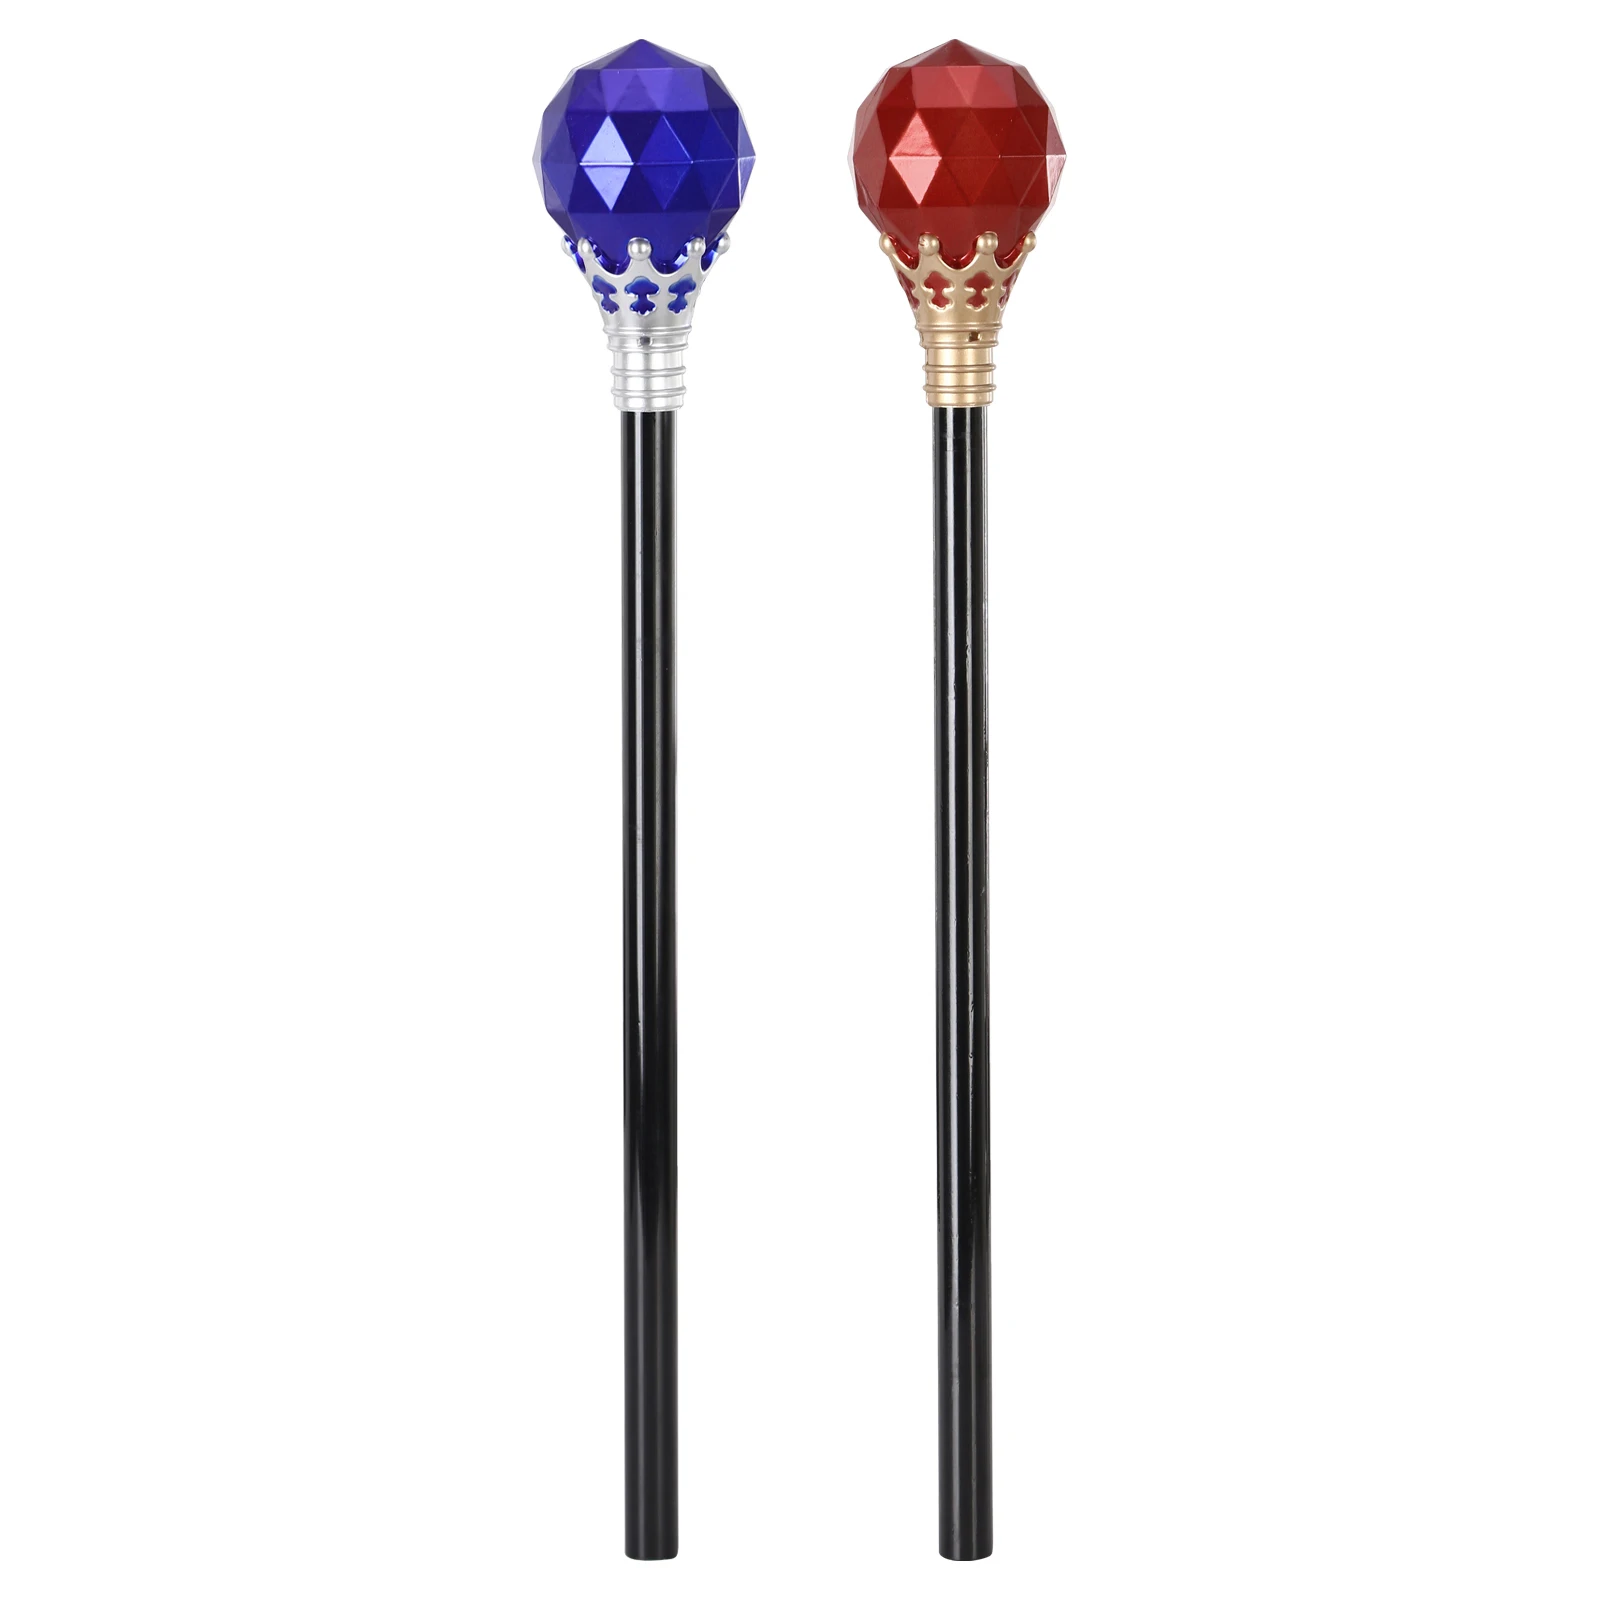 Halloween Scepter King And Queen Scepters for Kids Adult Cosplay Royal ...